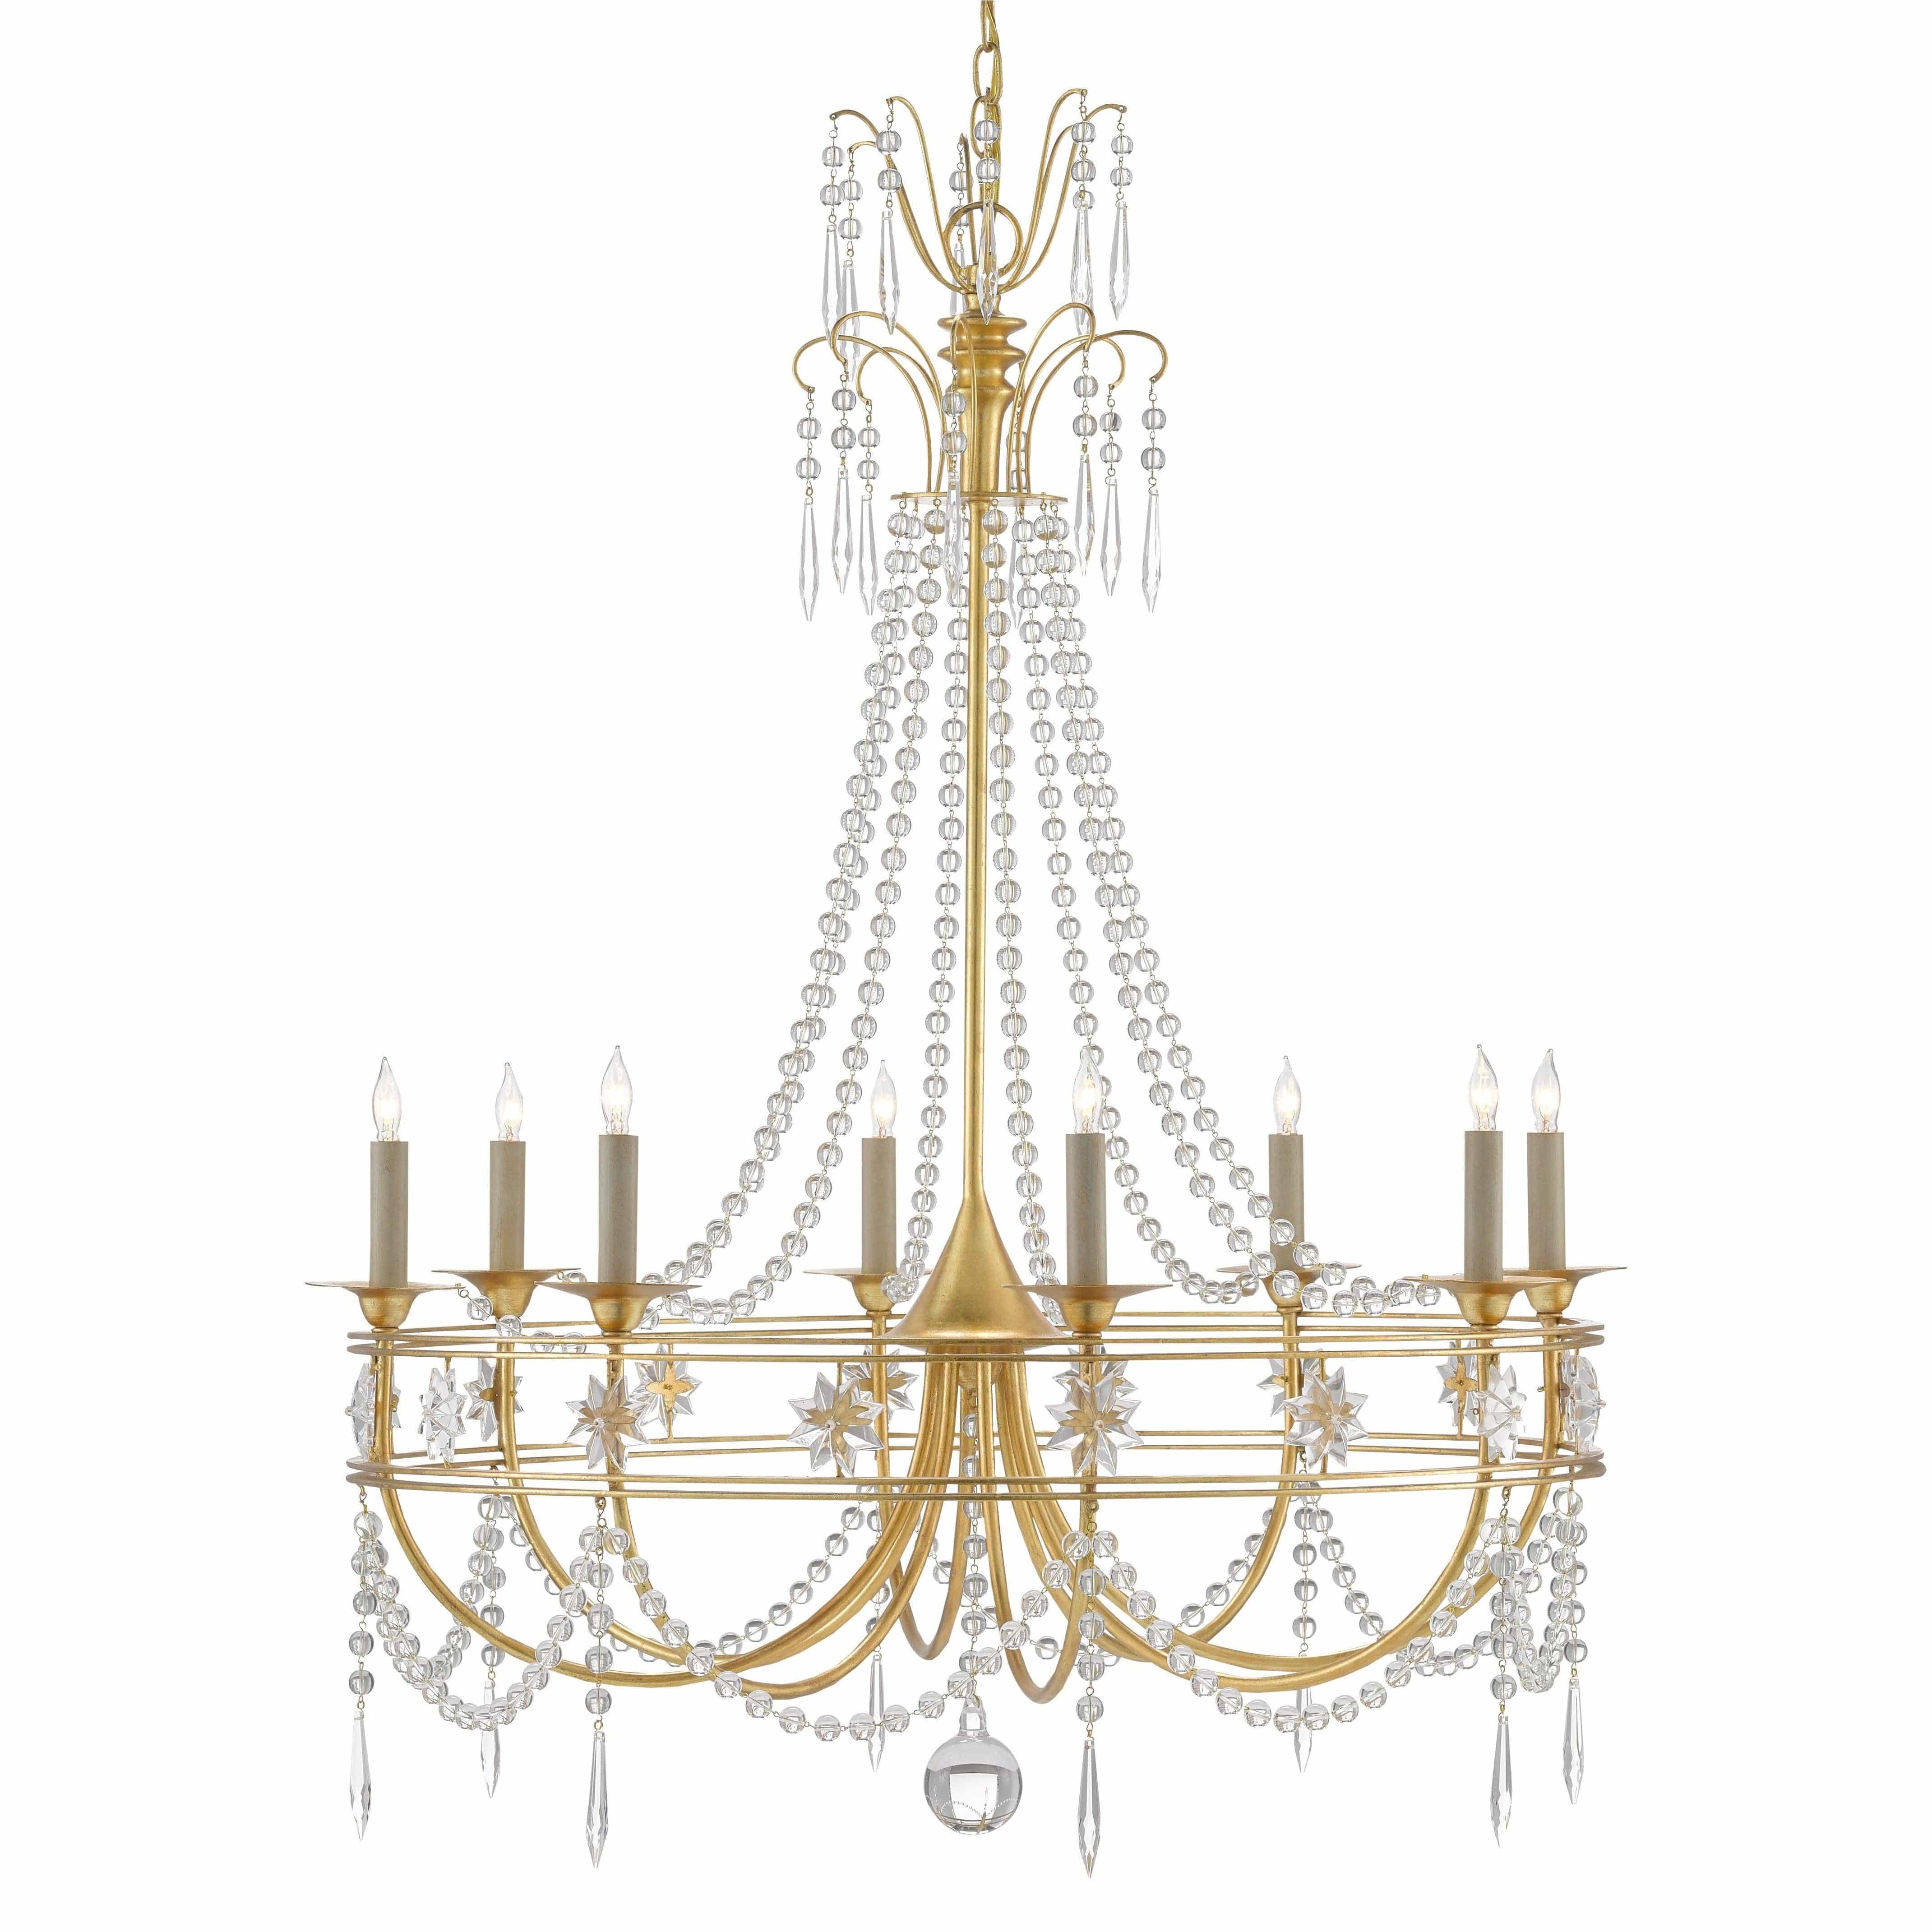 Currey and Company - Dream-Maker Chandelier - 9000-0740 | Montreal Lighting & Hardware